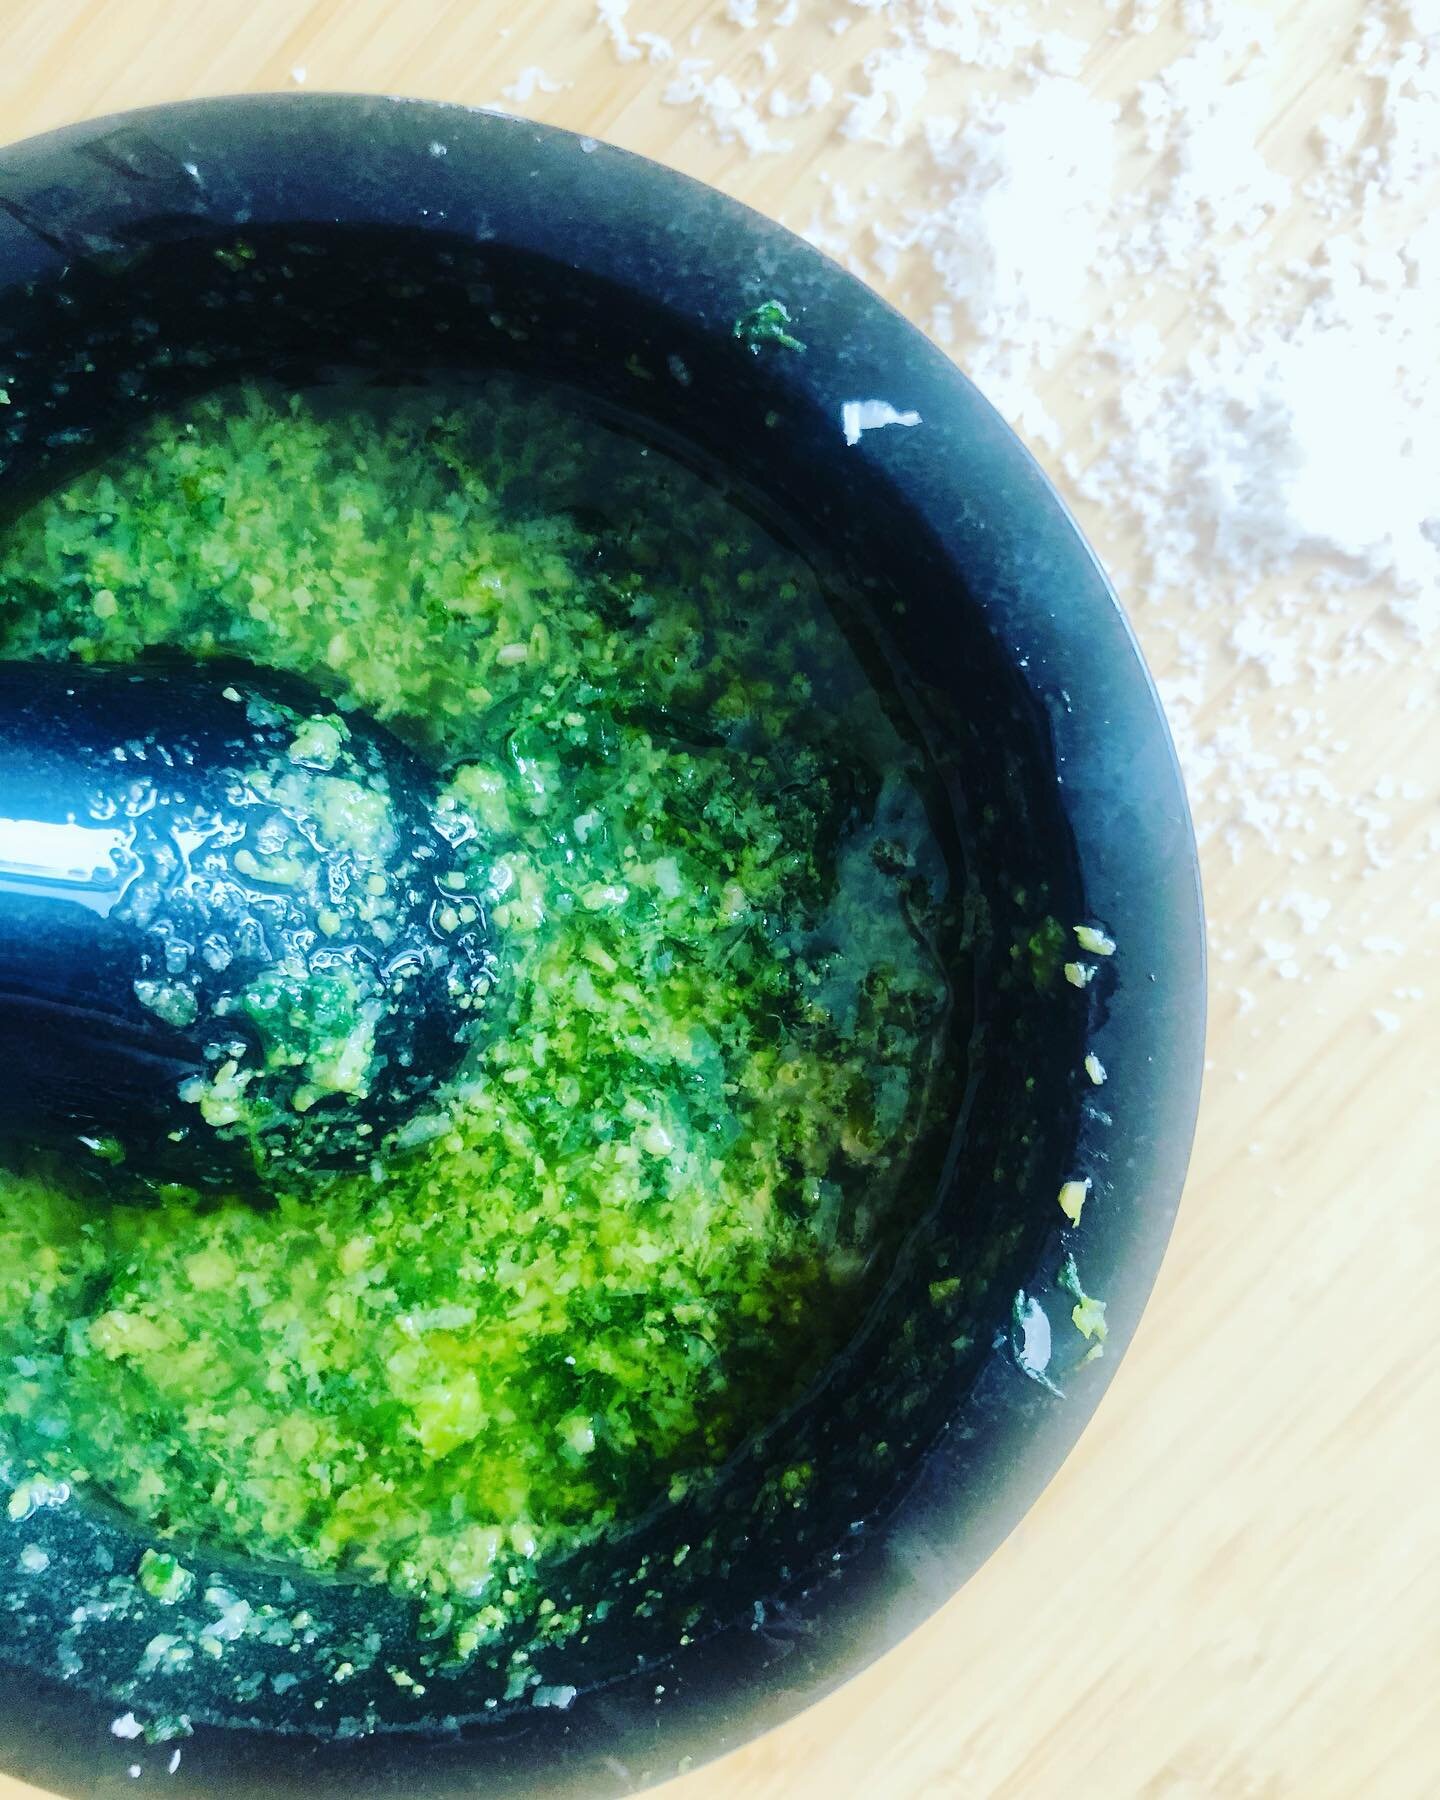 Pesto alla Genovese (but with sunflower seeds in lieu of pine nuts). I&rsquo;m teaching a class in a few weeks and a student has a nut allergy but everyone is so jazzed about making pesto - so I set to work this week to find an alternative that I lik